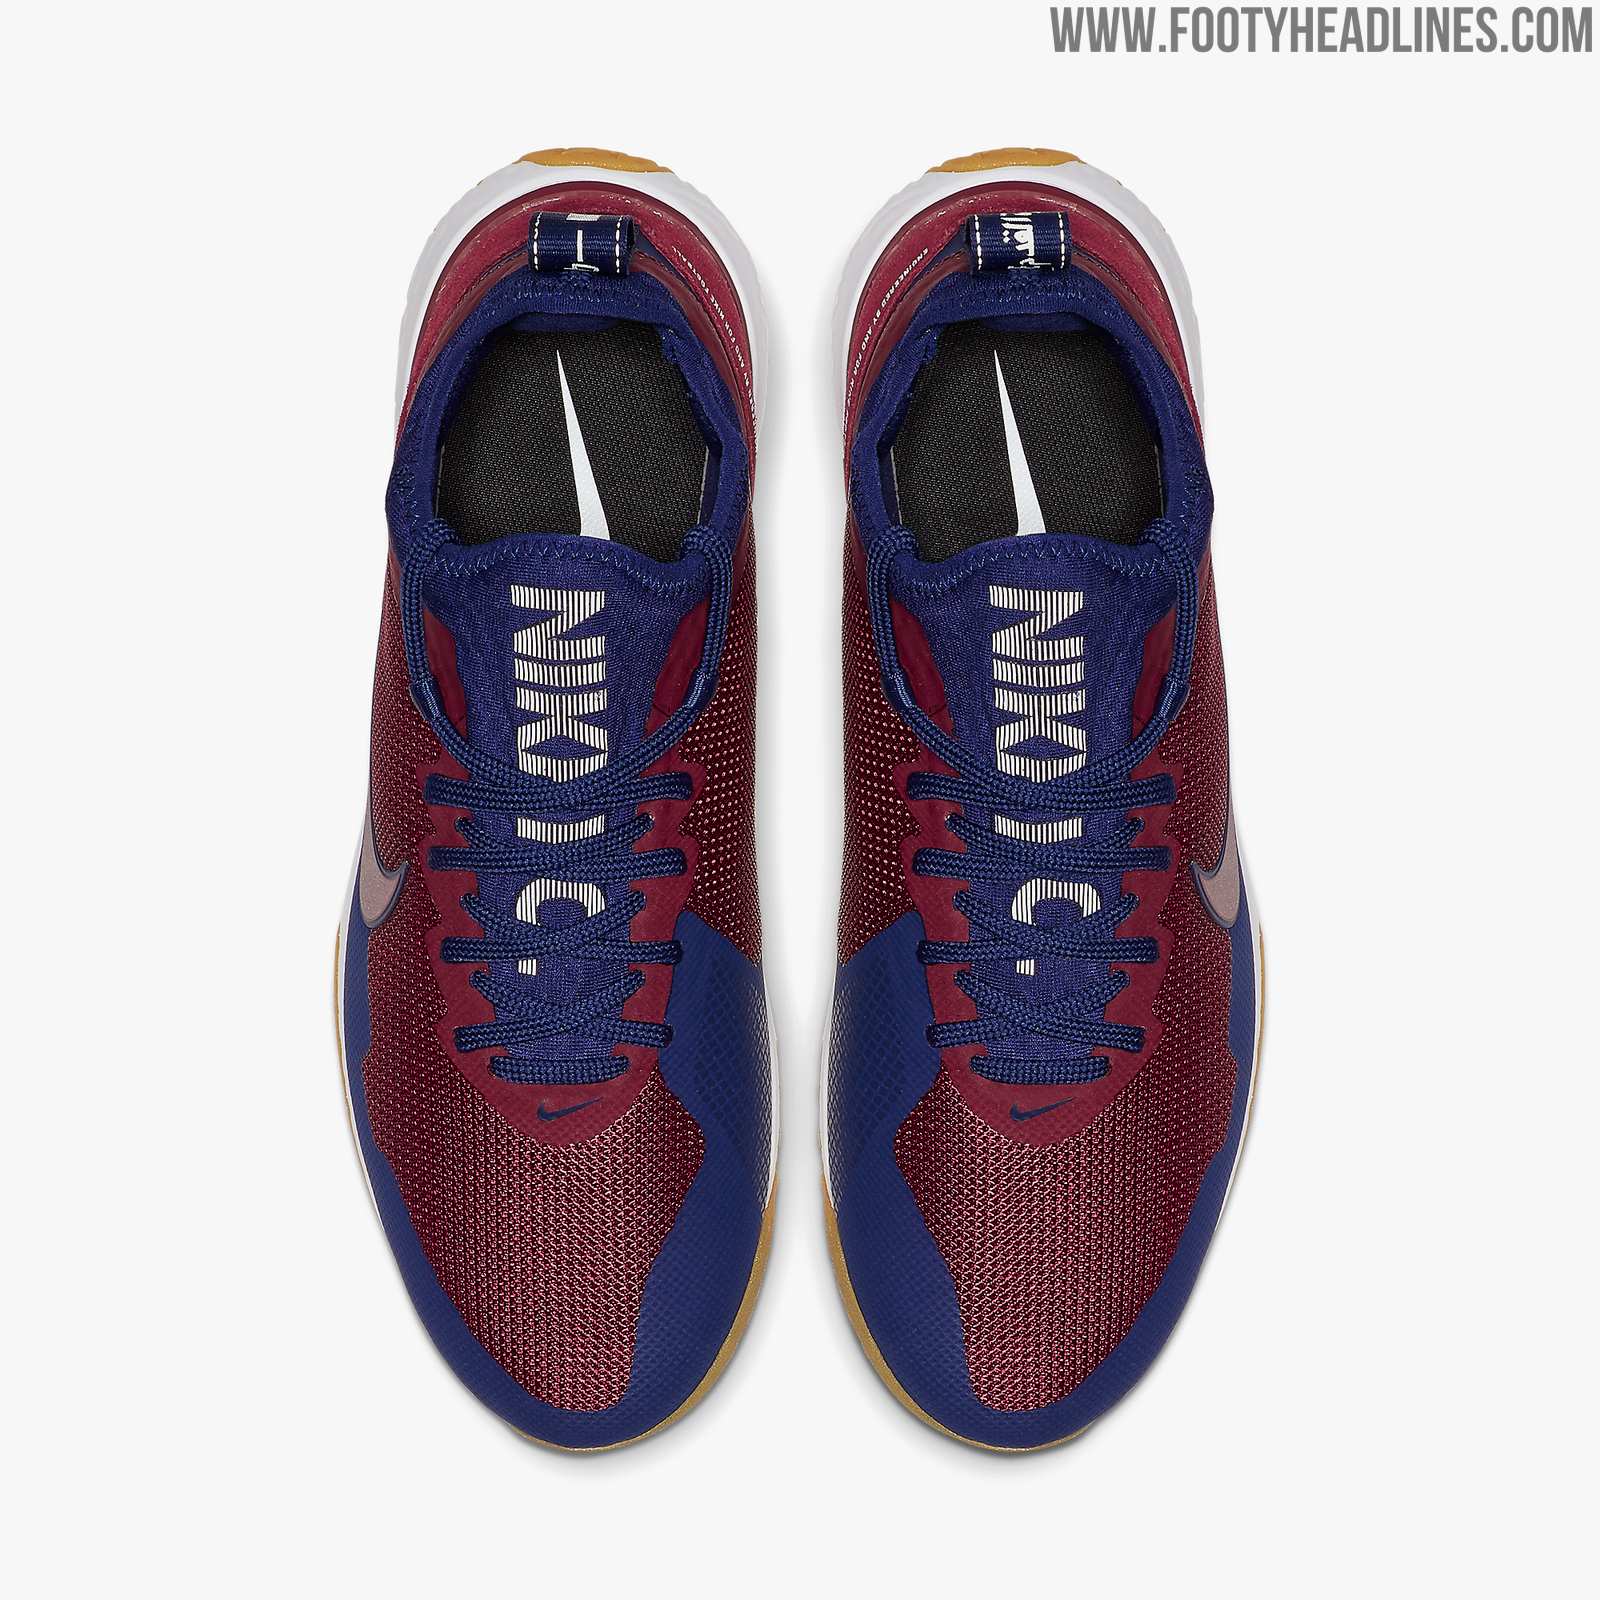 Barcelona Inspired? Nike Launch 2 New Colorways of the Nike FC Football ...